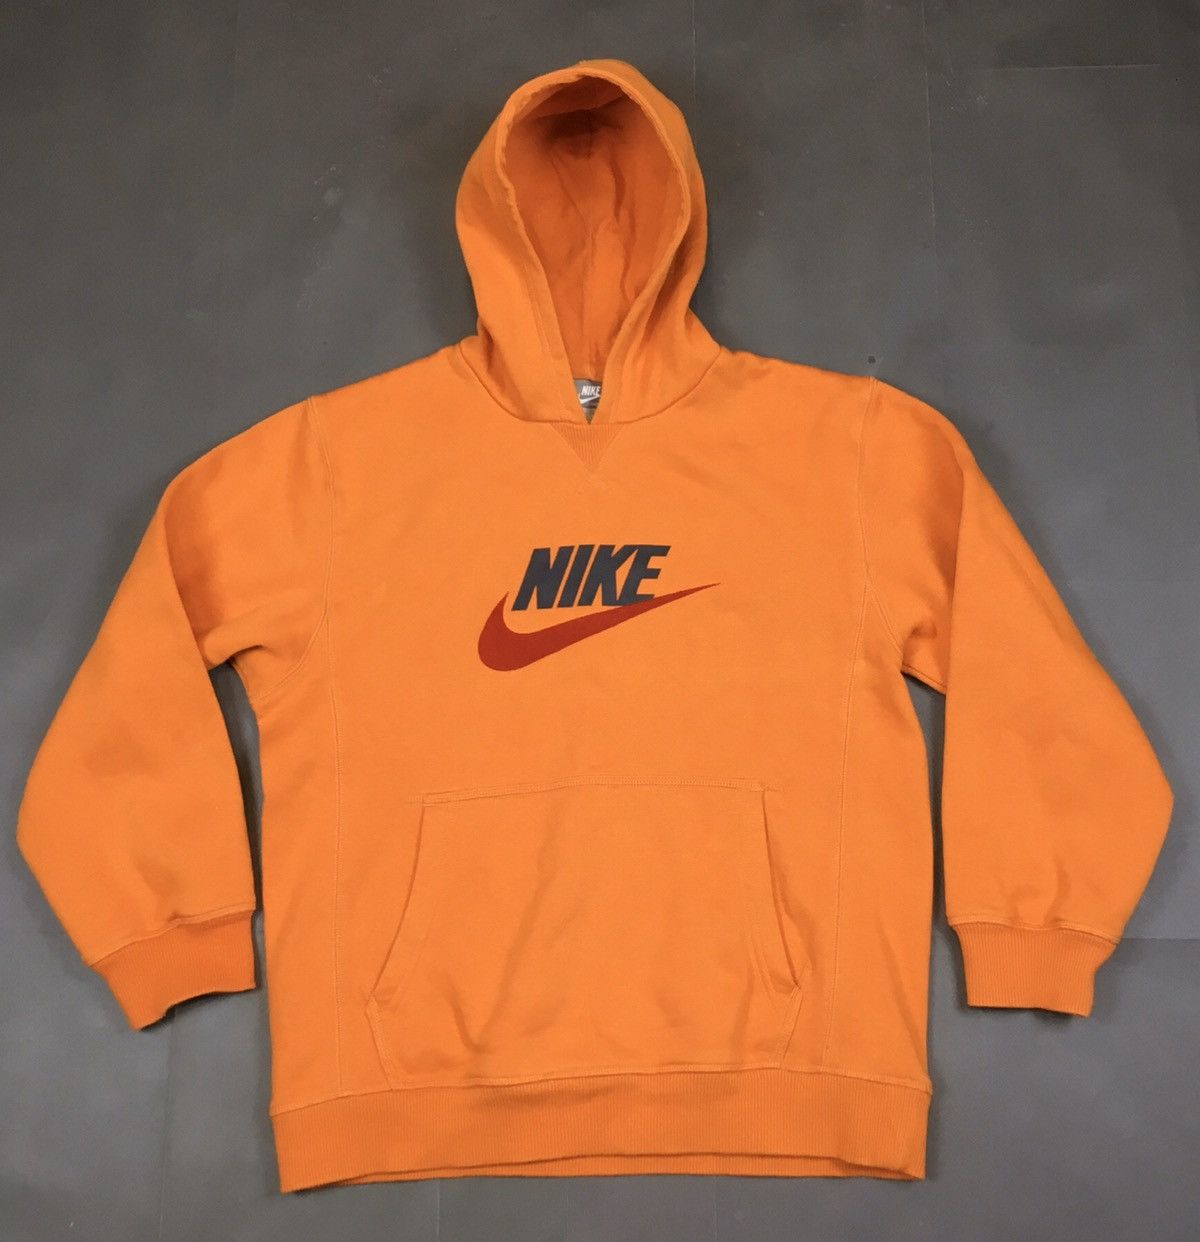 Nike Nike Vintage centr swoosh Hoodie Size US S / EU 44-46 / 1 - 2 Preview